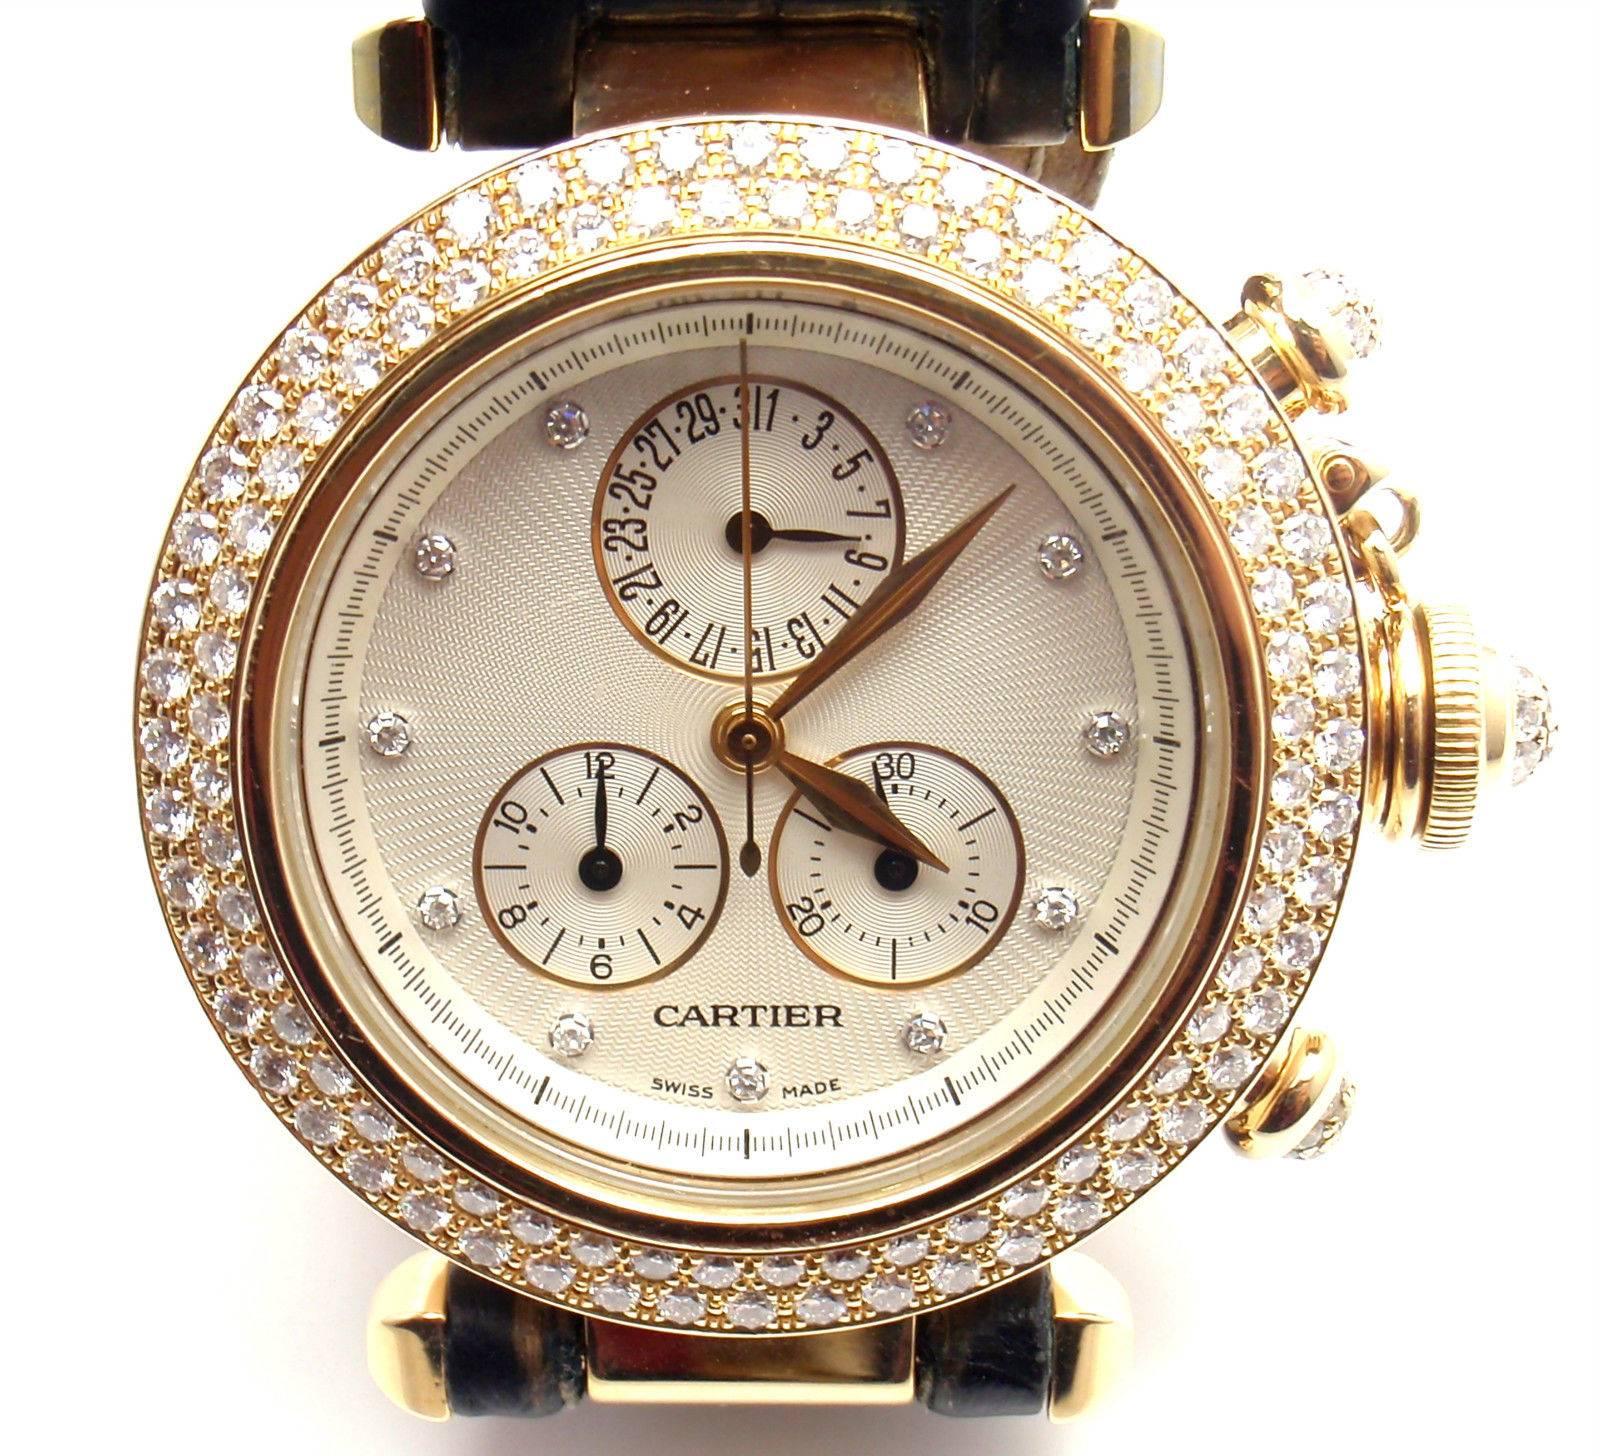 18k Yellow Gold Diamond Pasha Wristwatch by Cartier. 
Brand: Cartier
Style Name: Pasha
Reference Number: 1354/1
Case Material: 18k Yellow Gold with Diamonds
Dial Color:  White dial, gold hands
Movement: Quartz
Functions: Hours, Minutes
Crystal: